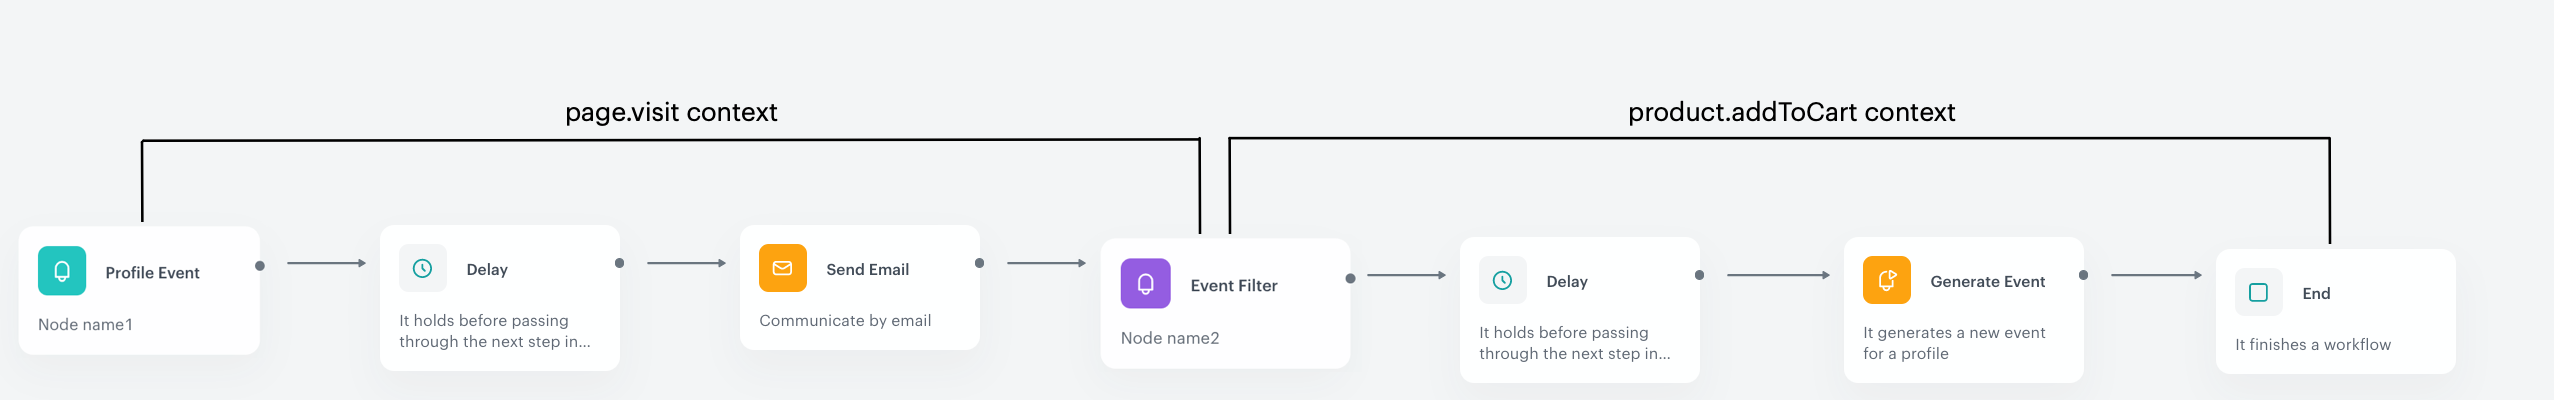 Context switch in a workflow